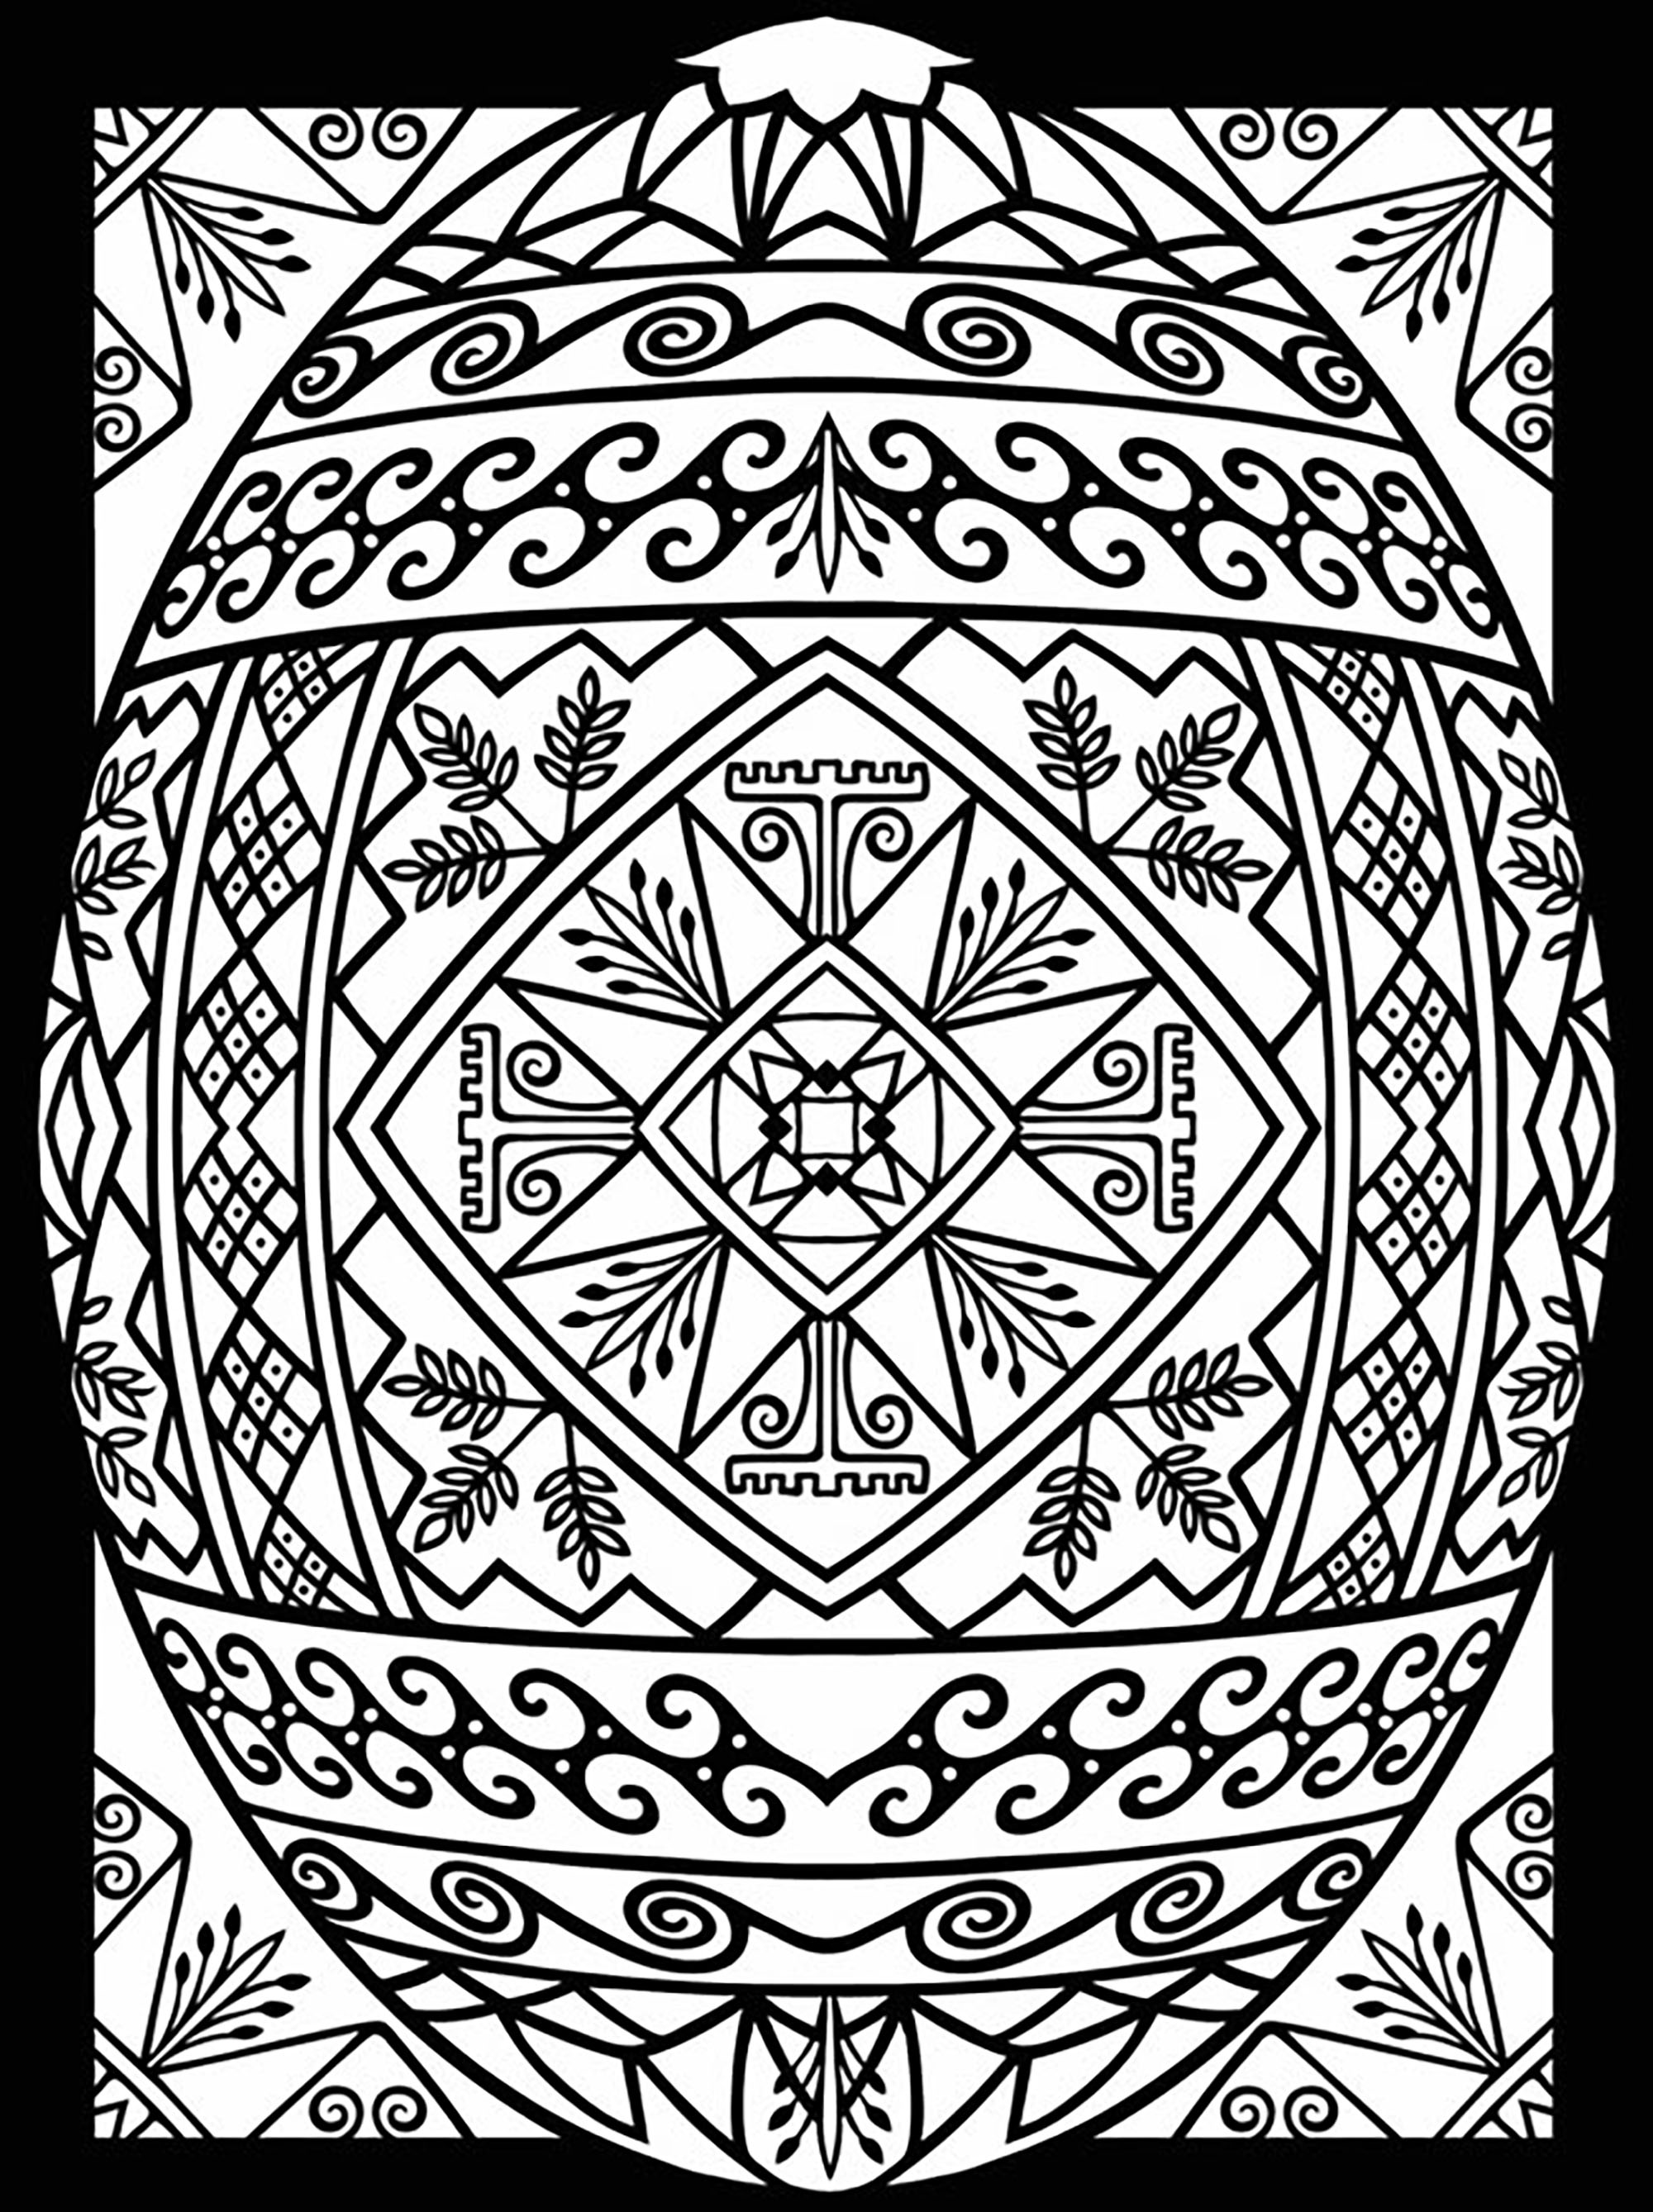 Download Easter eggs with abstract patterns - Easter Adult Coloring Pages